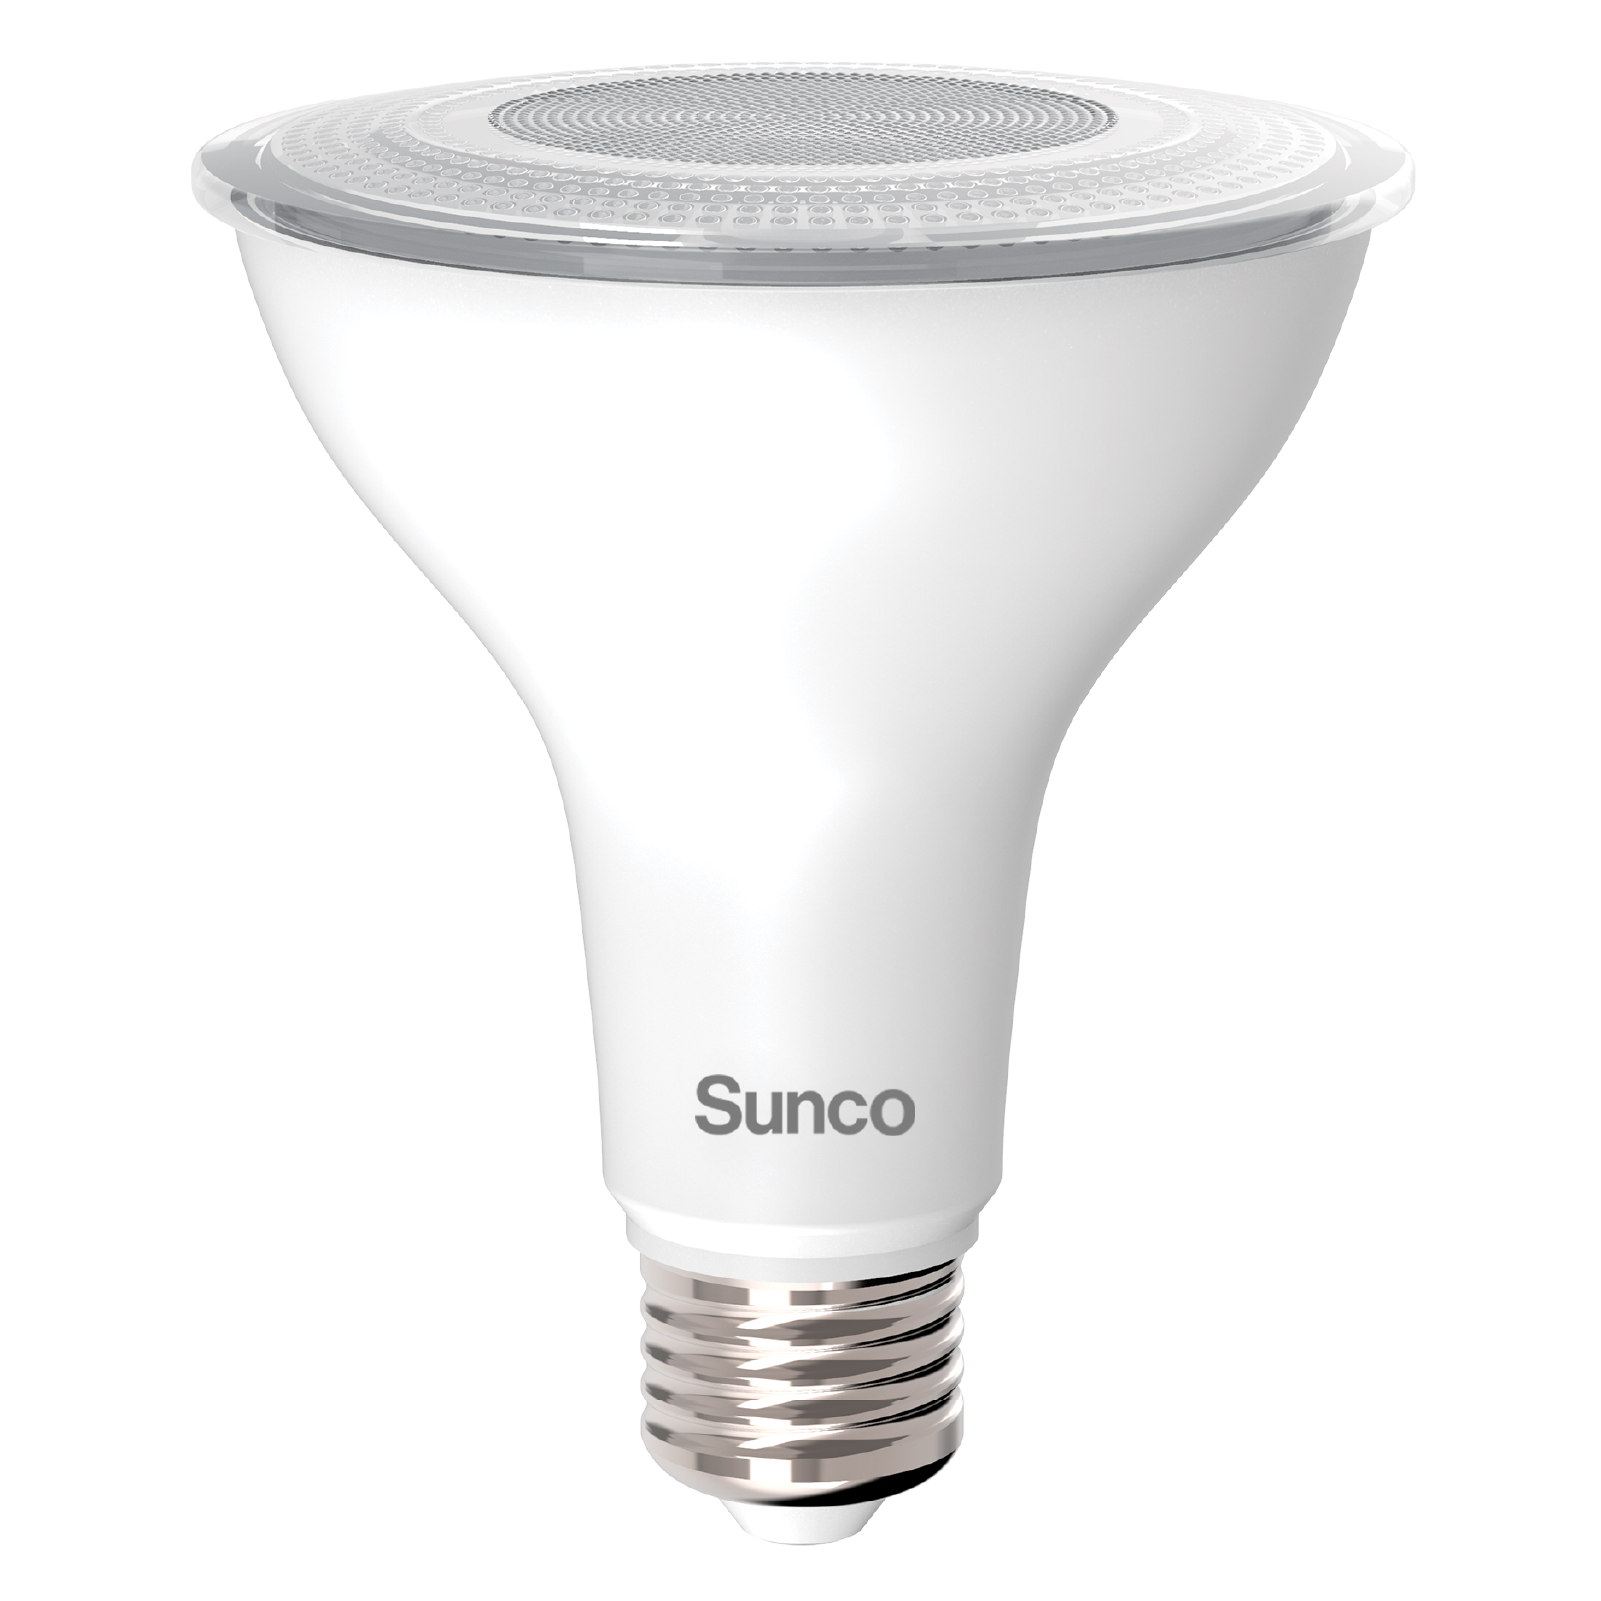 Sunco PAR30 LED Bulb Dusk to Dawn is wet rated for outdoor use and includes an E26 base. The Dusk to Dawn feature automatically turns LED on when no light is detected and off again when light returns. A wet rated, 11W LED that is equivalent to a 75W traditional bulb. The narrow 40-degree bulb works well as a spotlight in landscape lighting to highlight sculpture or greenery or architectural details.